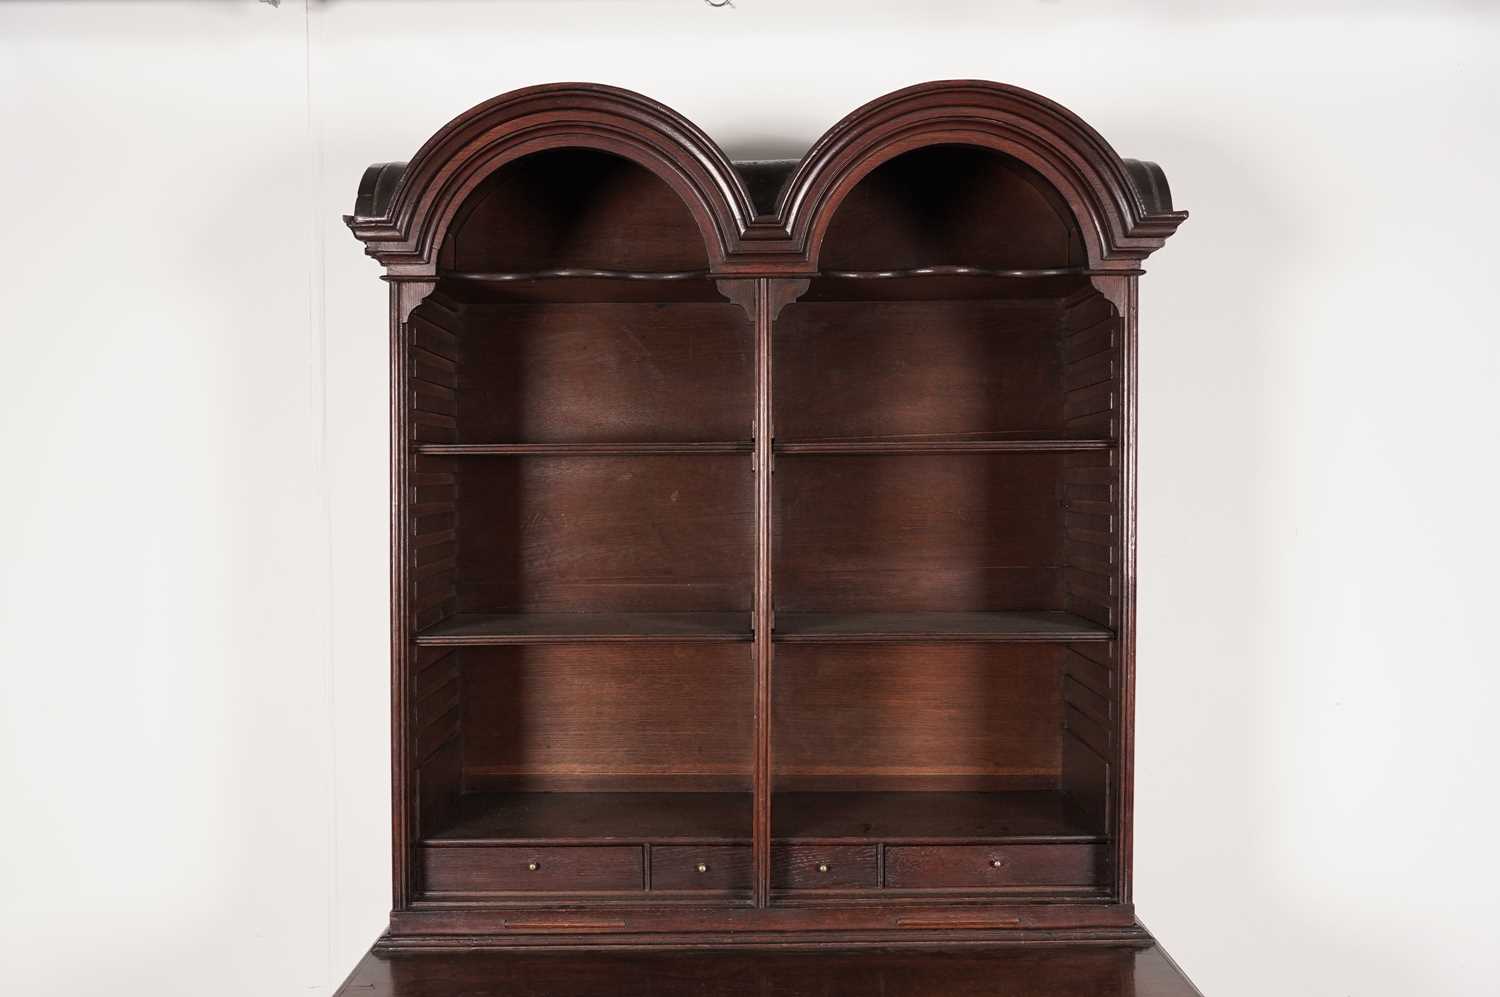 A Georgian style oak double dome bookcase cabinet - Image 5 of 6